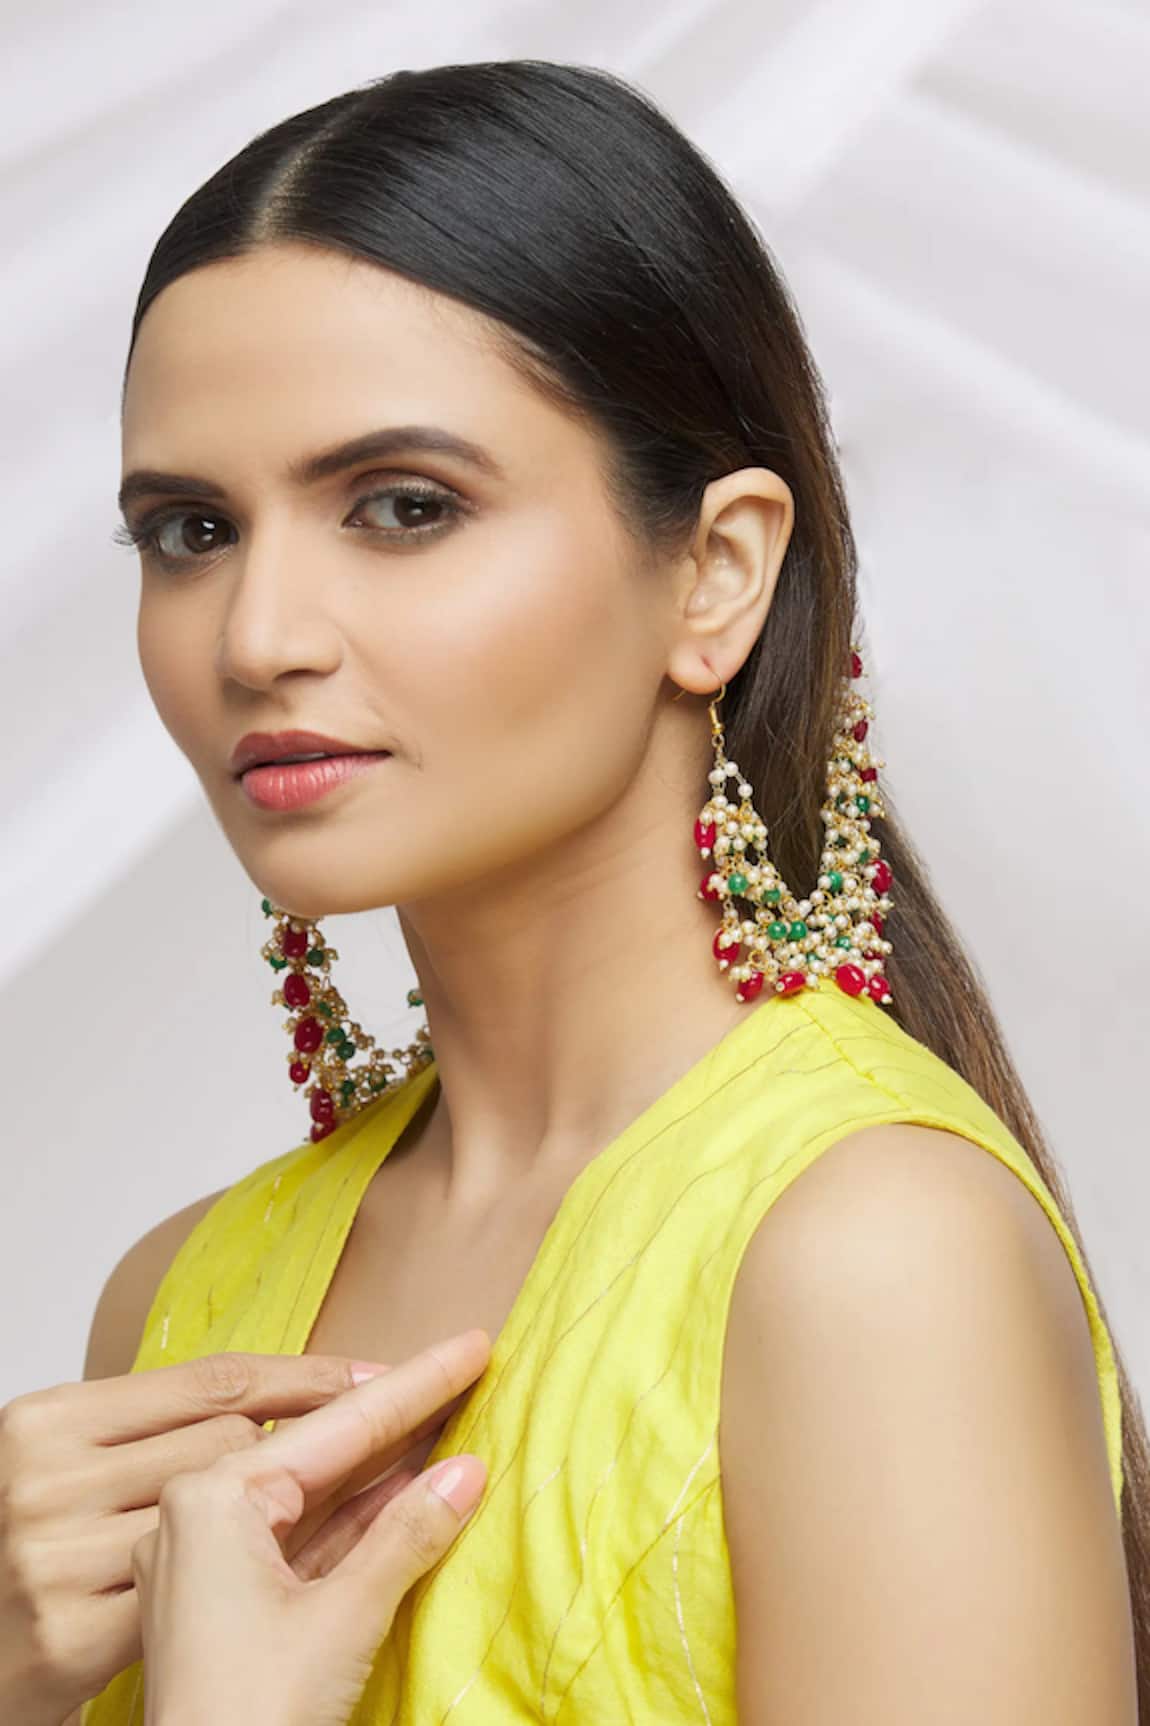 Just Shradha's Multi Layered Beaded Ear Chains